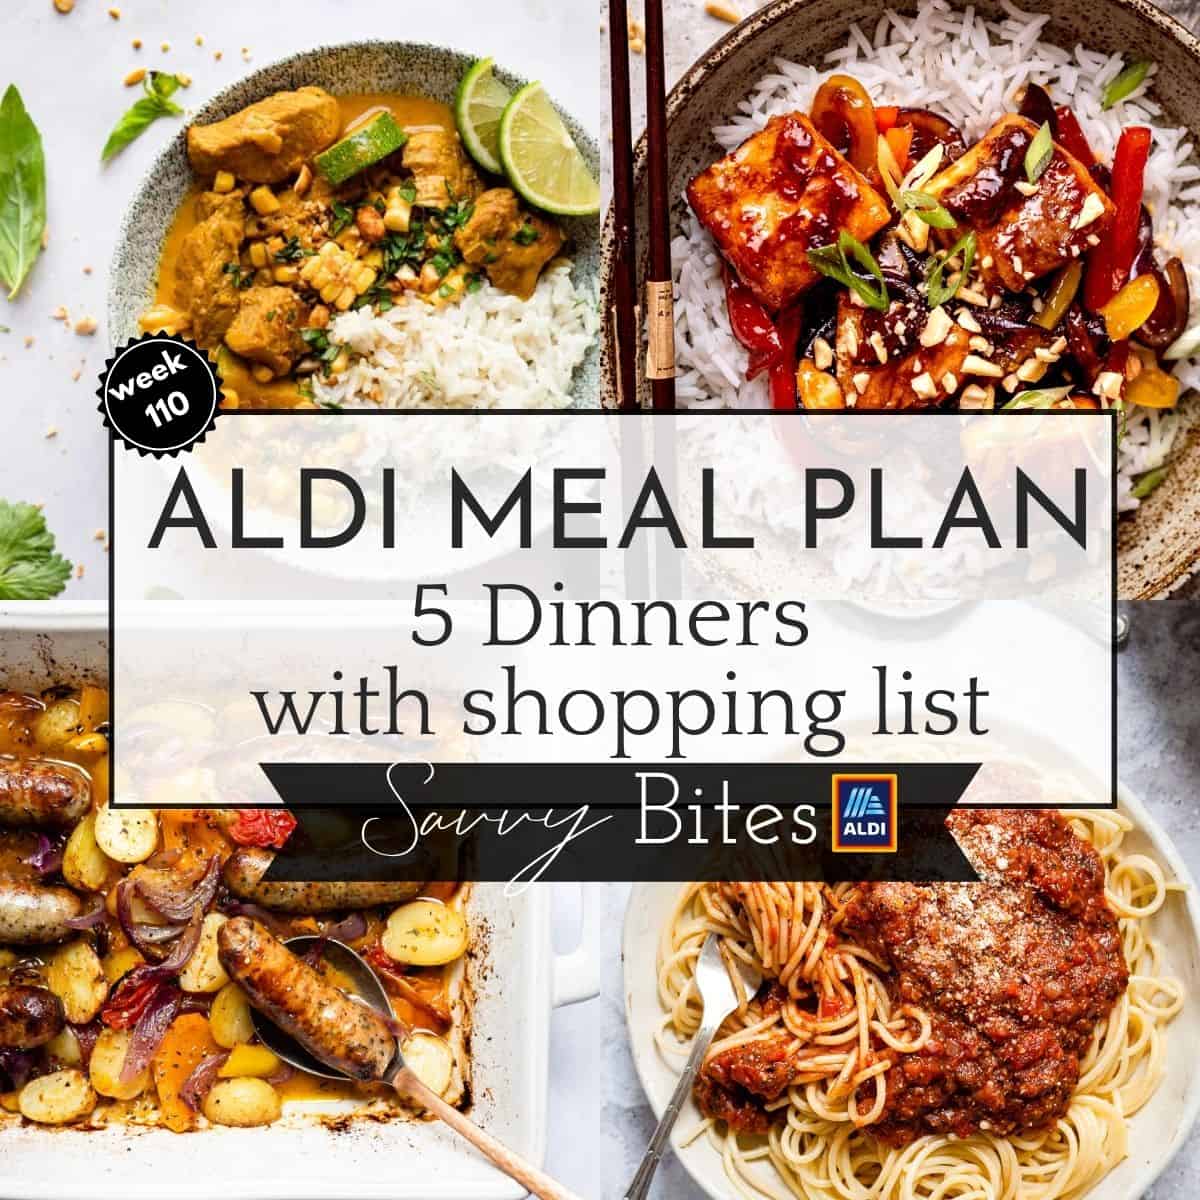 Aldi Family budget meal plan collage.